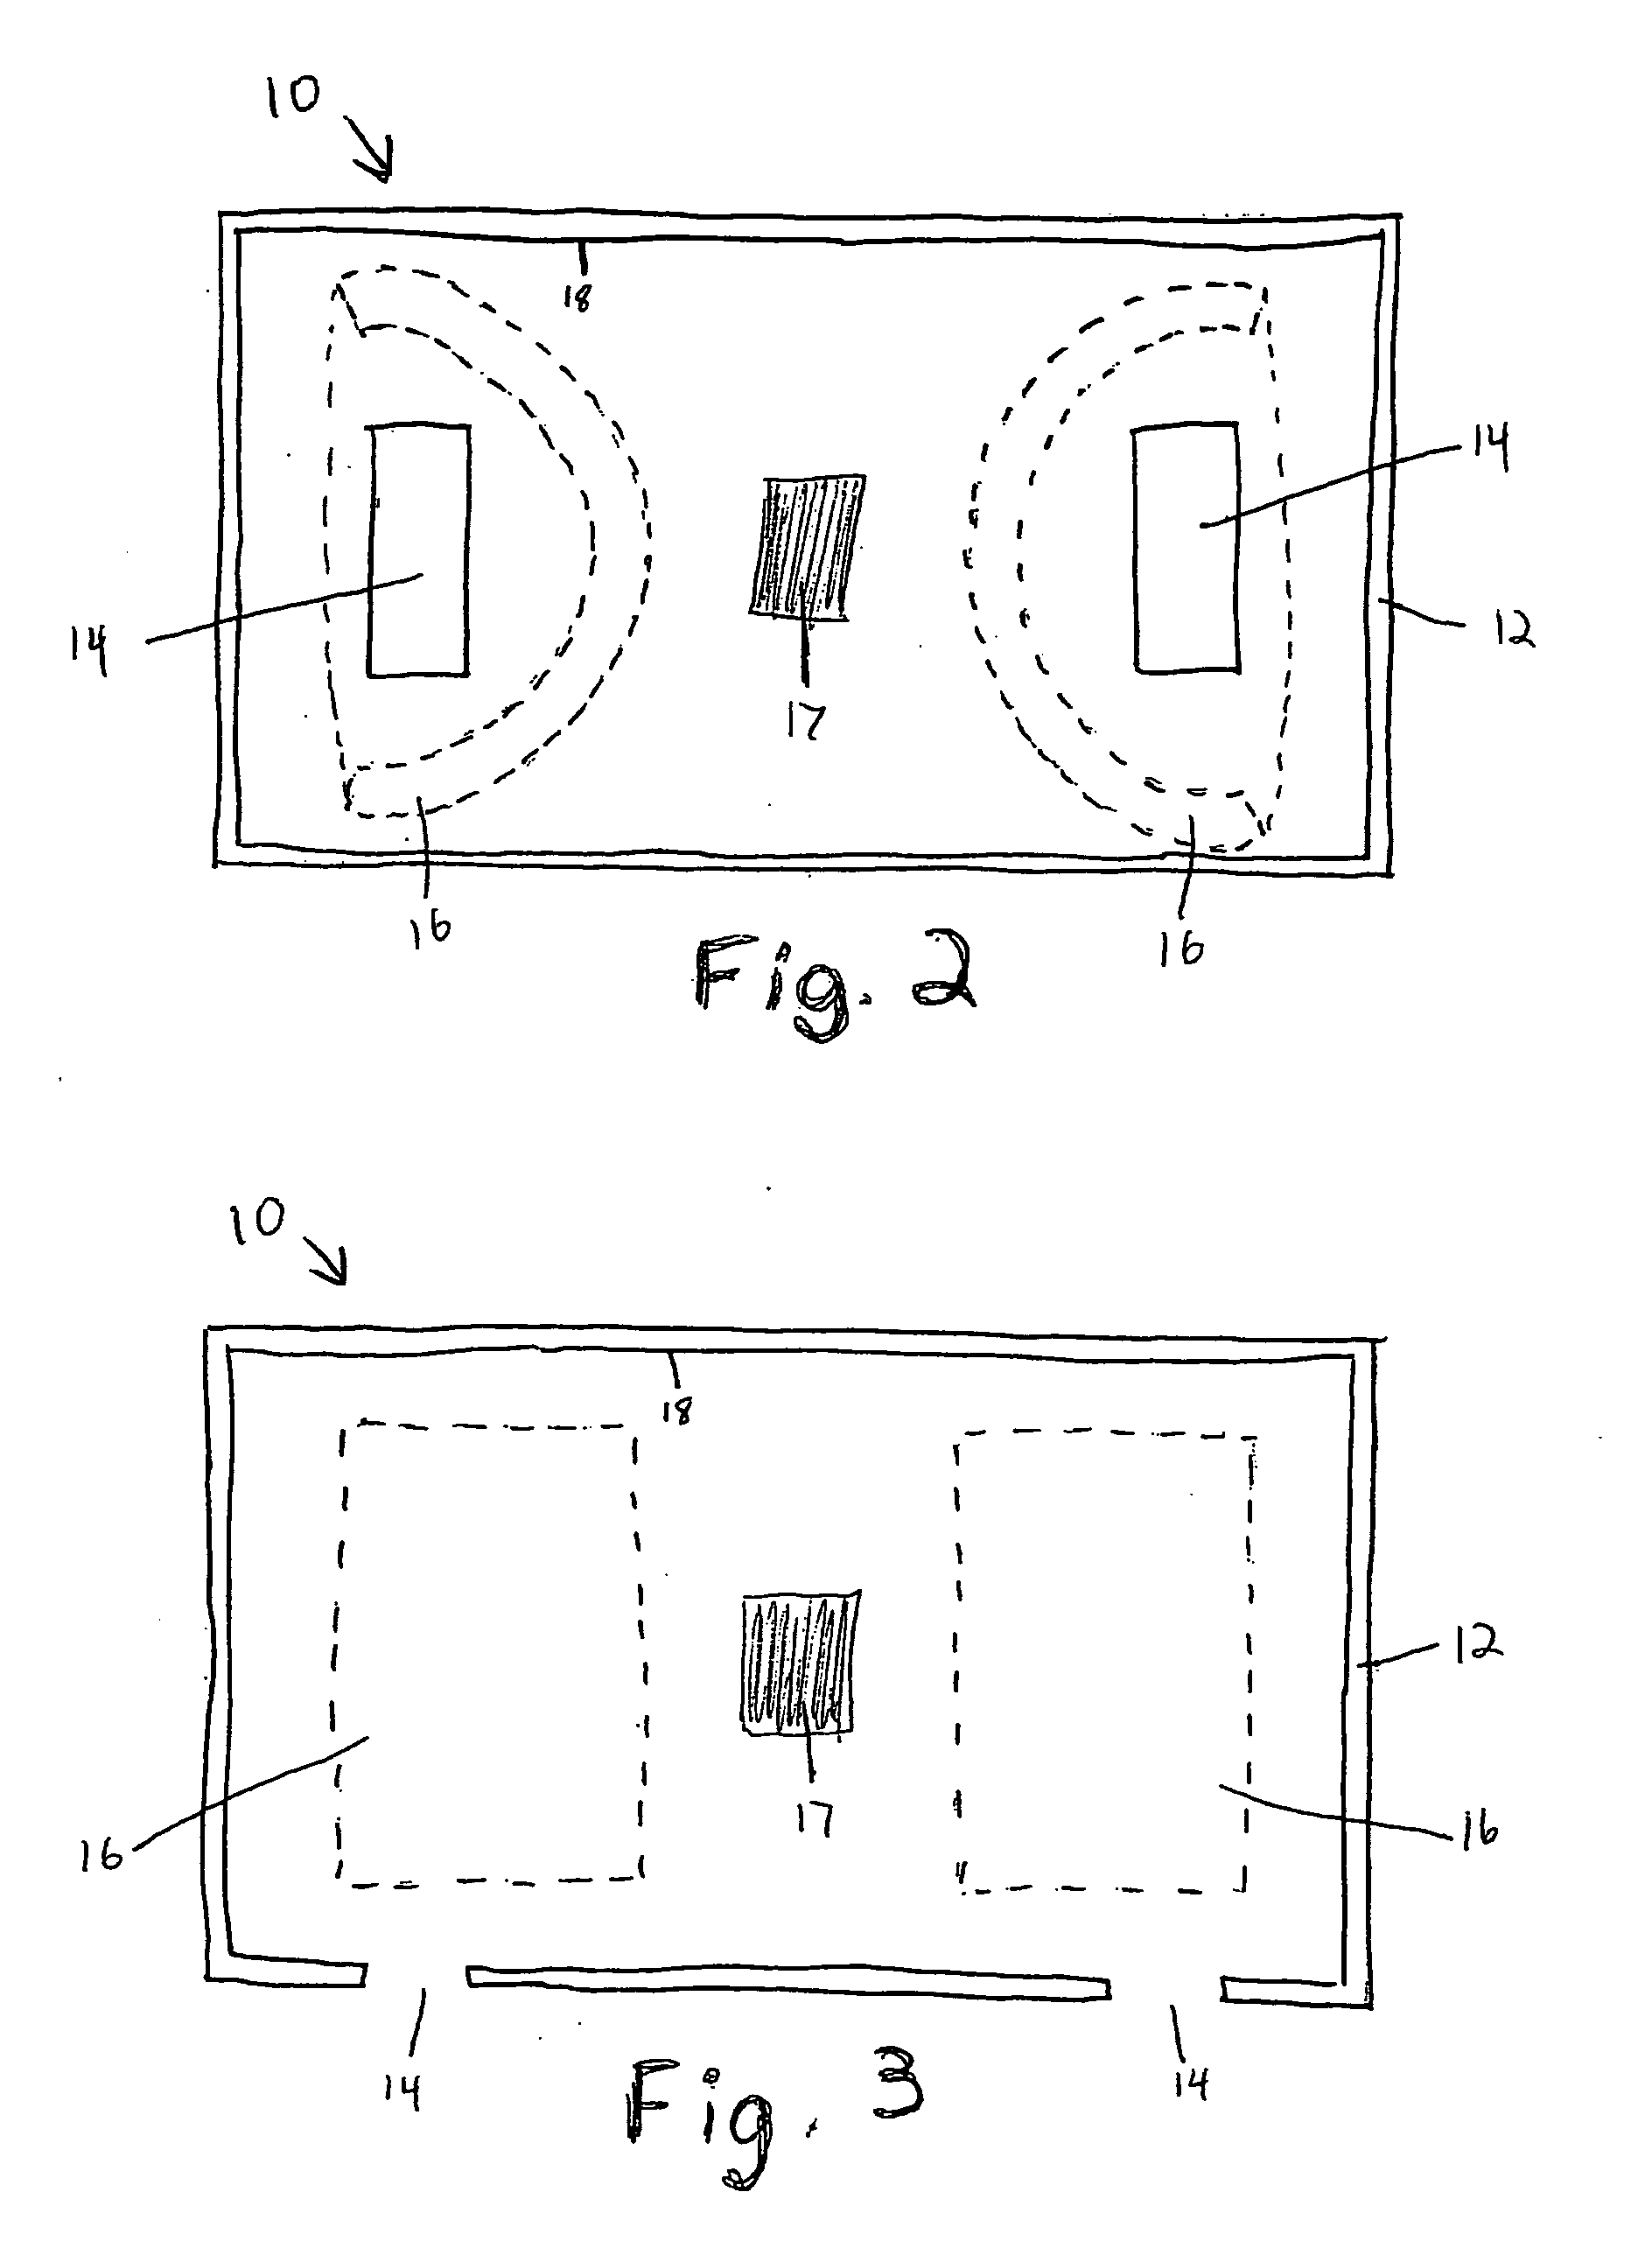 Method and system for capturing fingerprints, palm prints and hand geometry